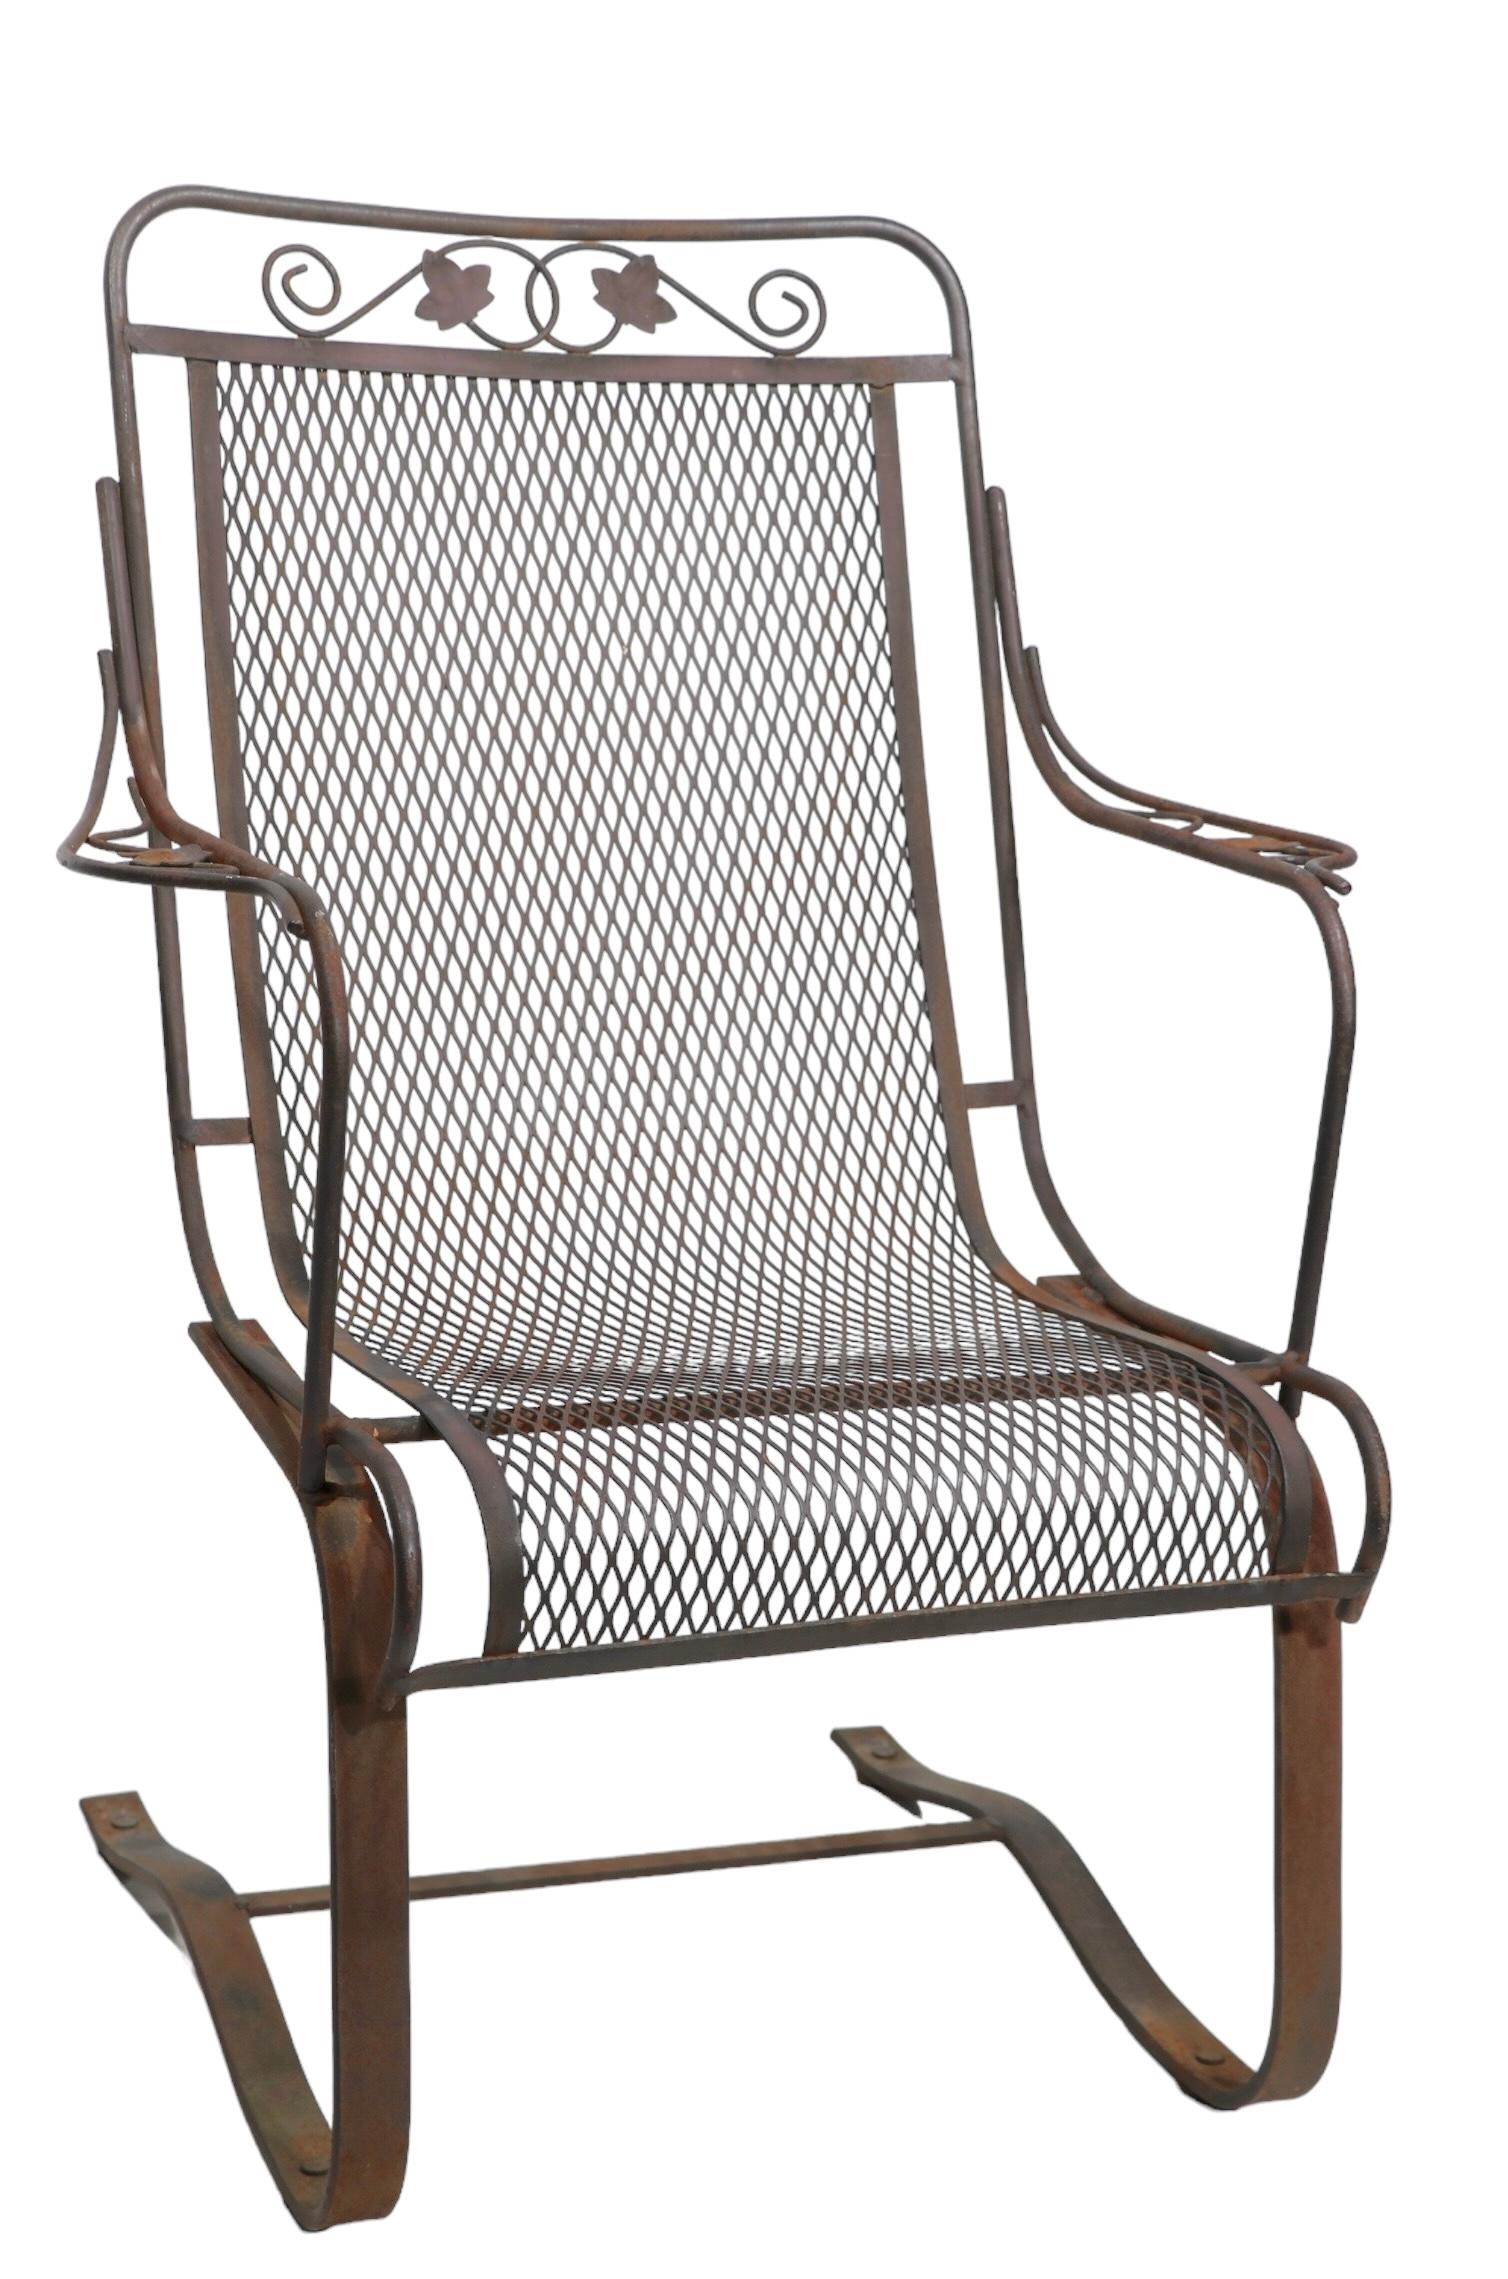 American Wrought Iron Cantilevered High Back Lounge Garden Patio Poolside Chair 